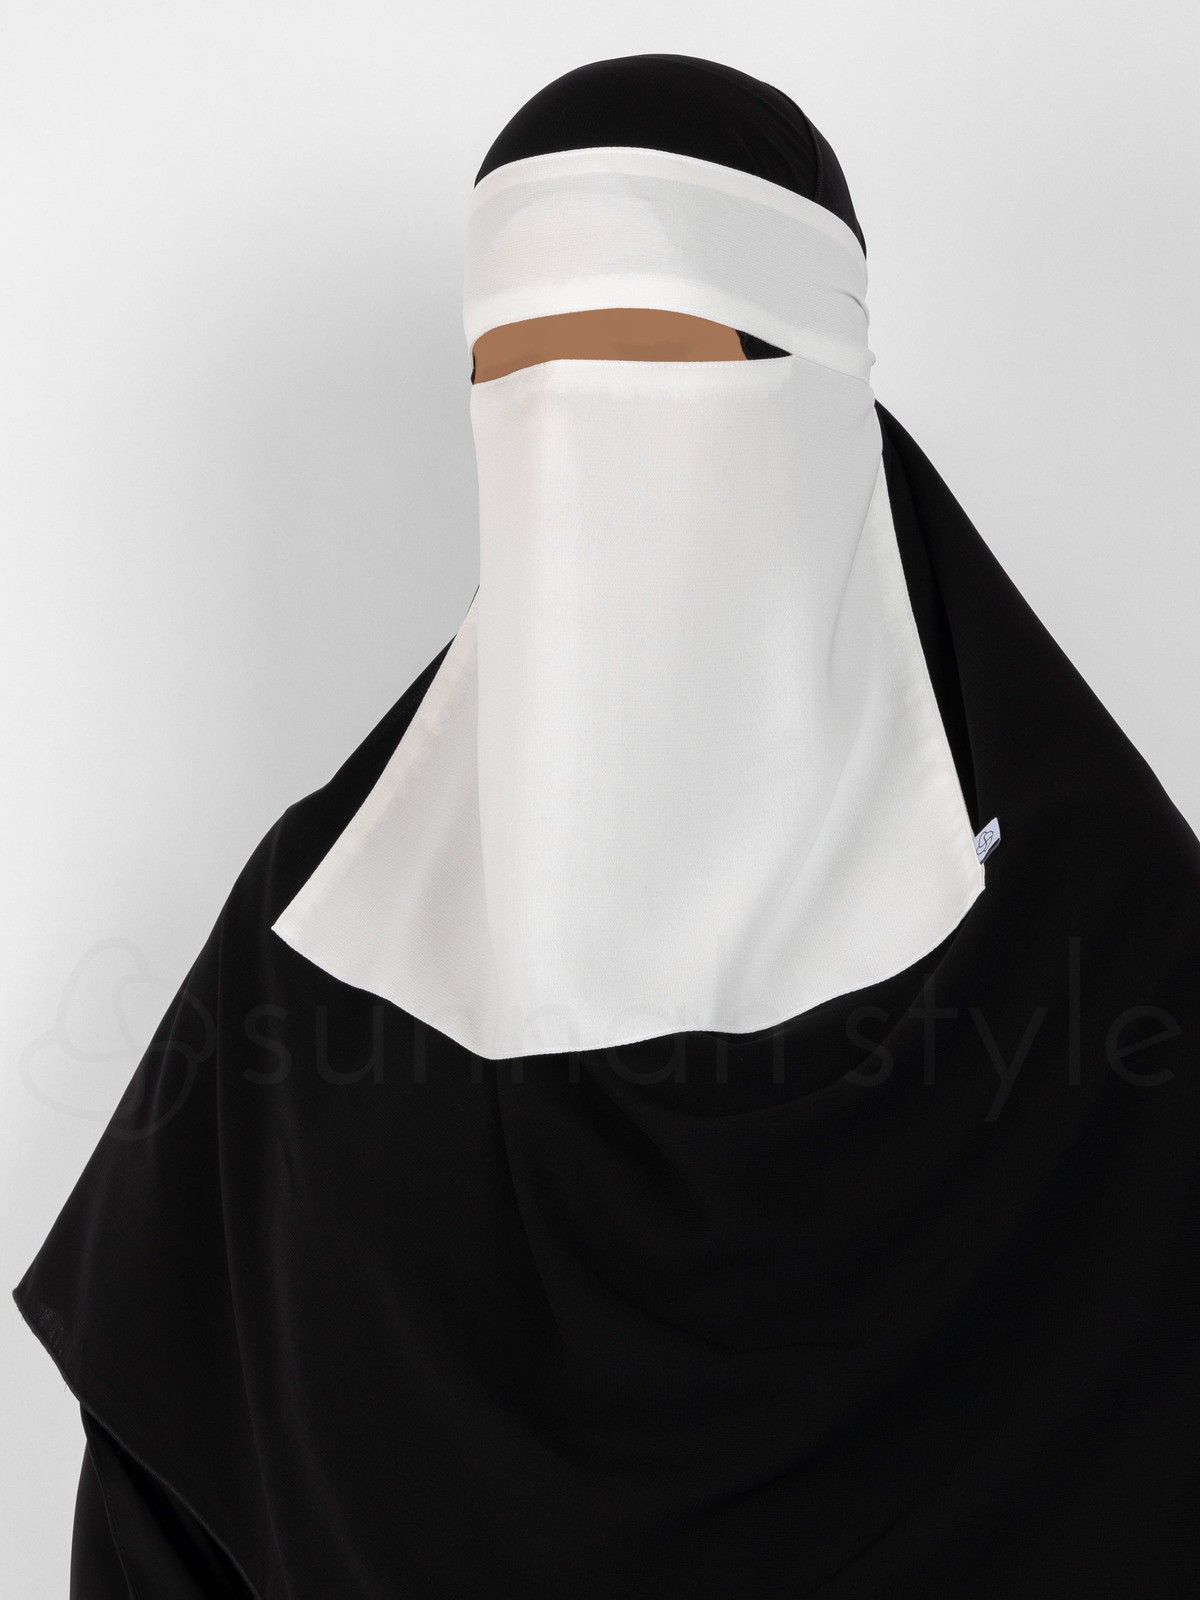 Sunnah Style - Short One Layer Niqab (White)